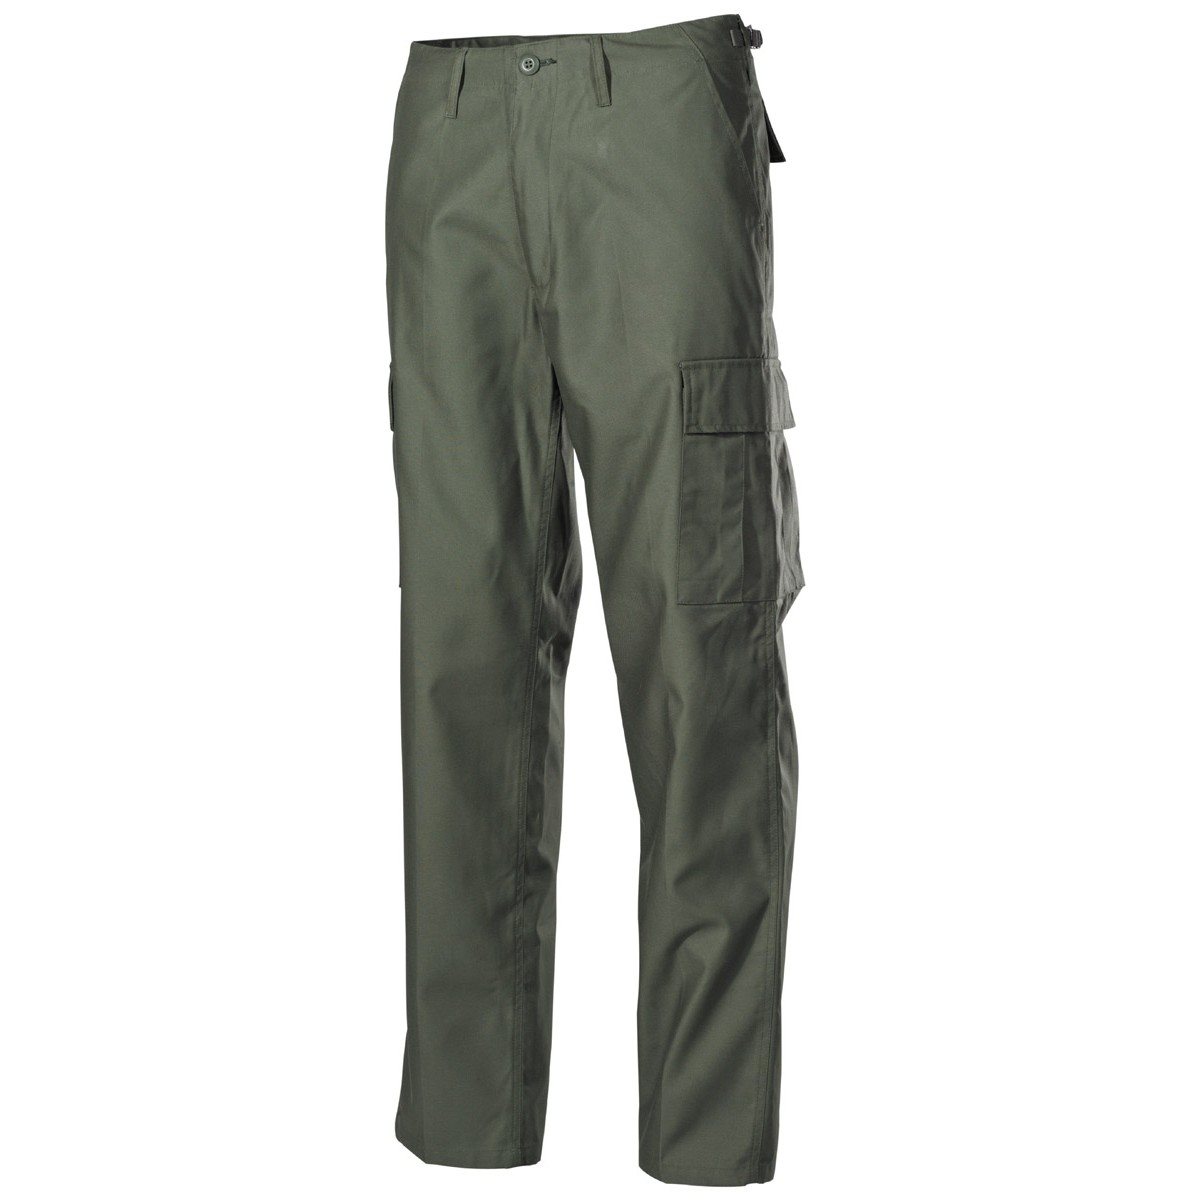 La Police Gear Women's Stretch Ops Tactical Pants Wholesale Website, 60%  OFF | lupon.gov.ph